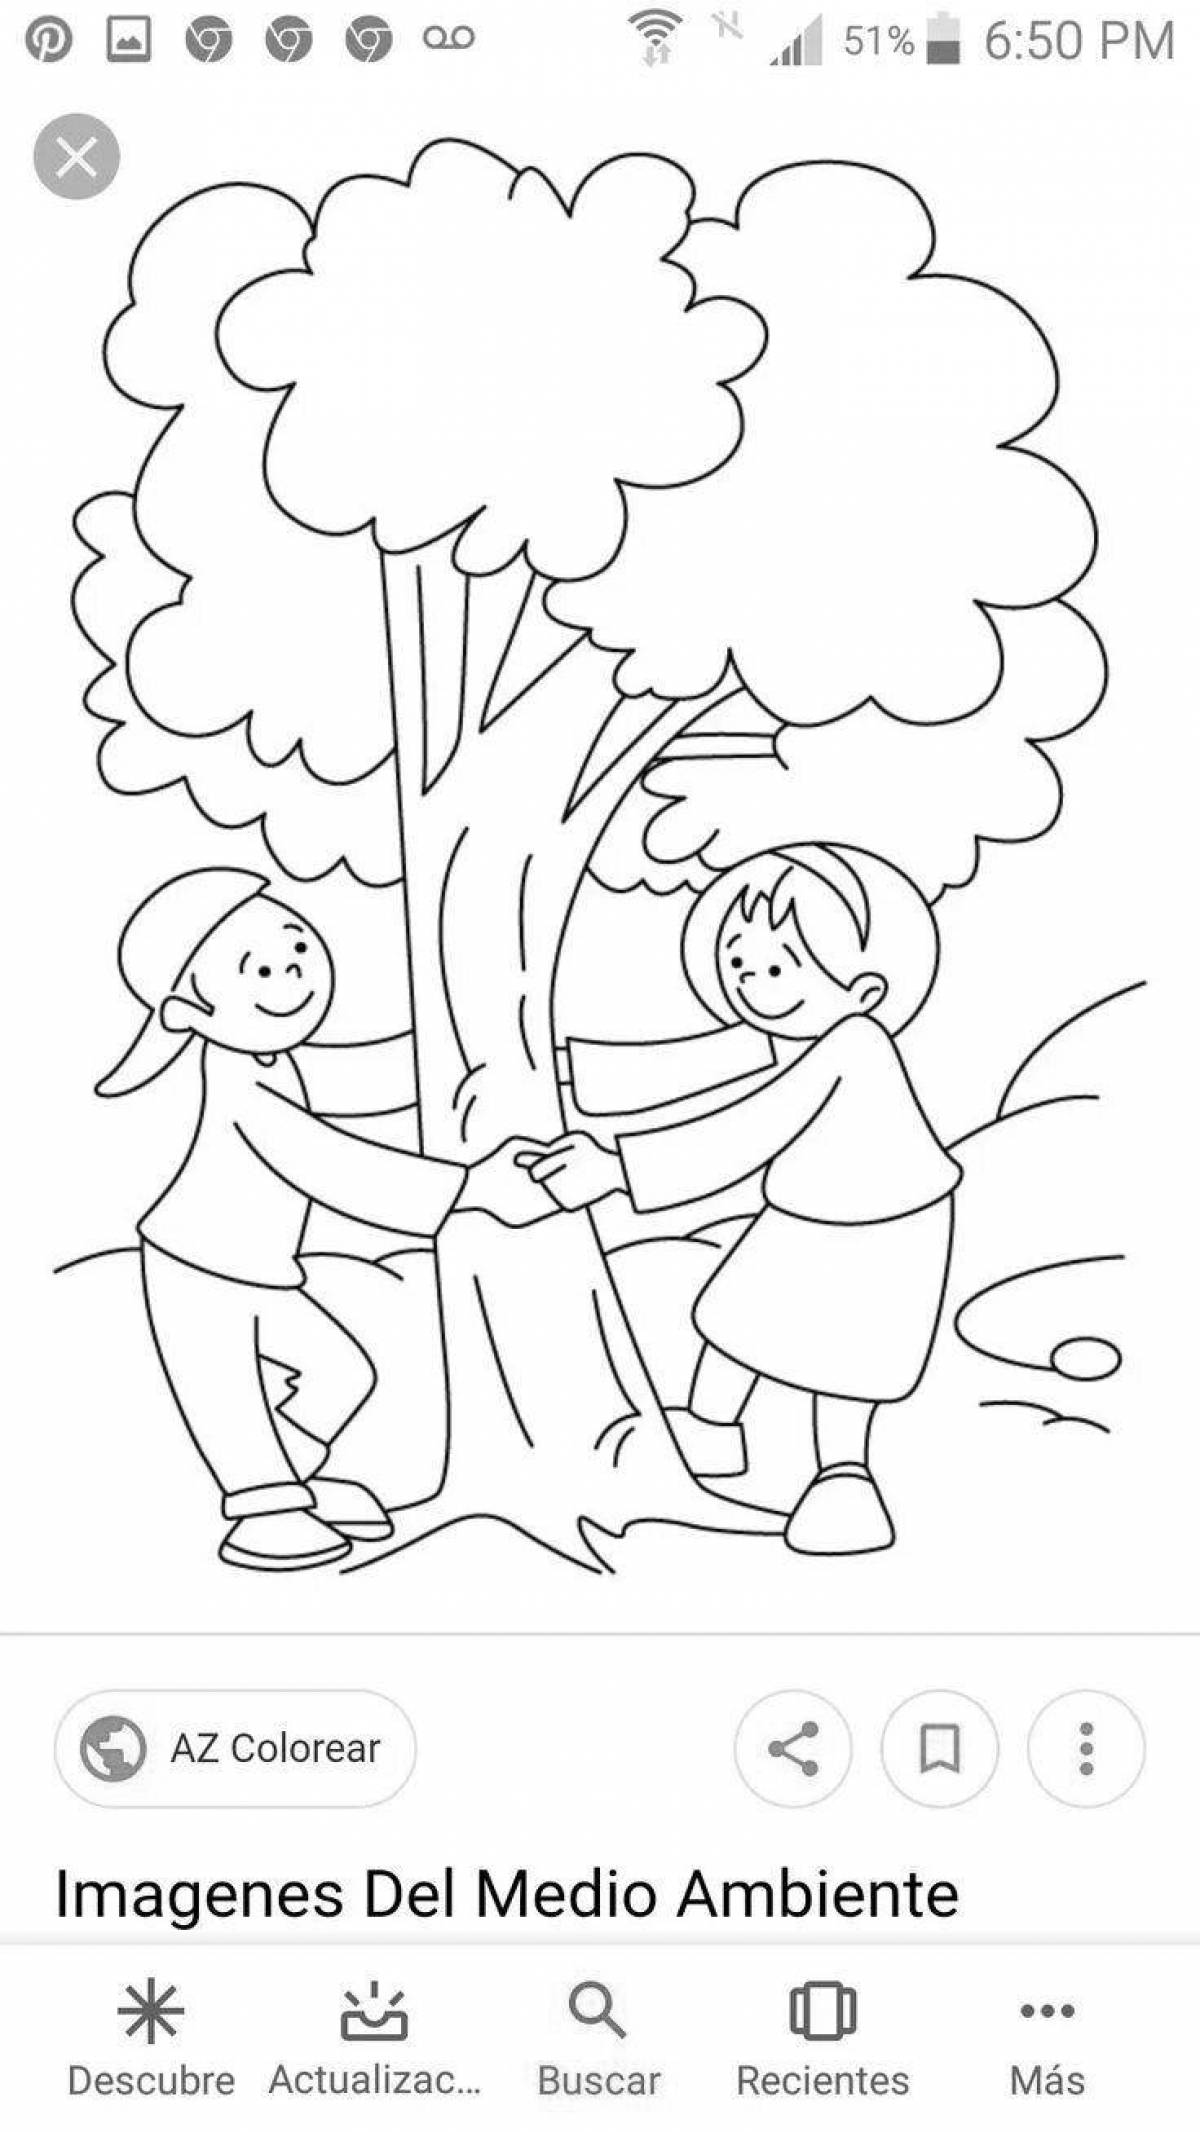 Fun coloring book take care of nature for preschoolers on ecology